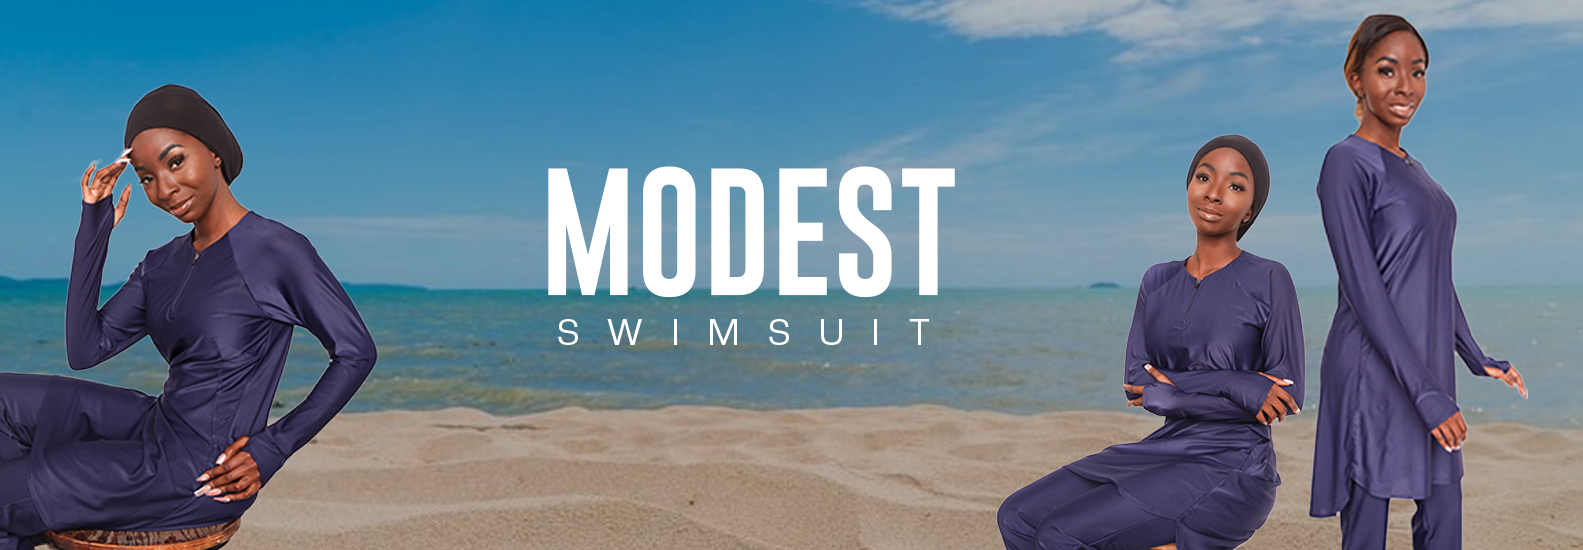 How to Find the Modest Swimsuit for Women?